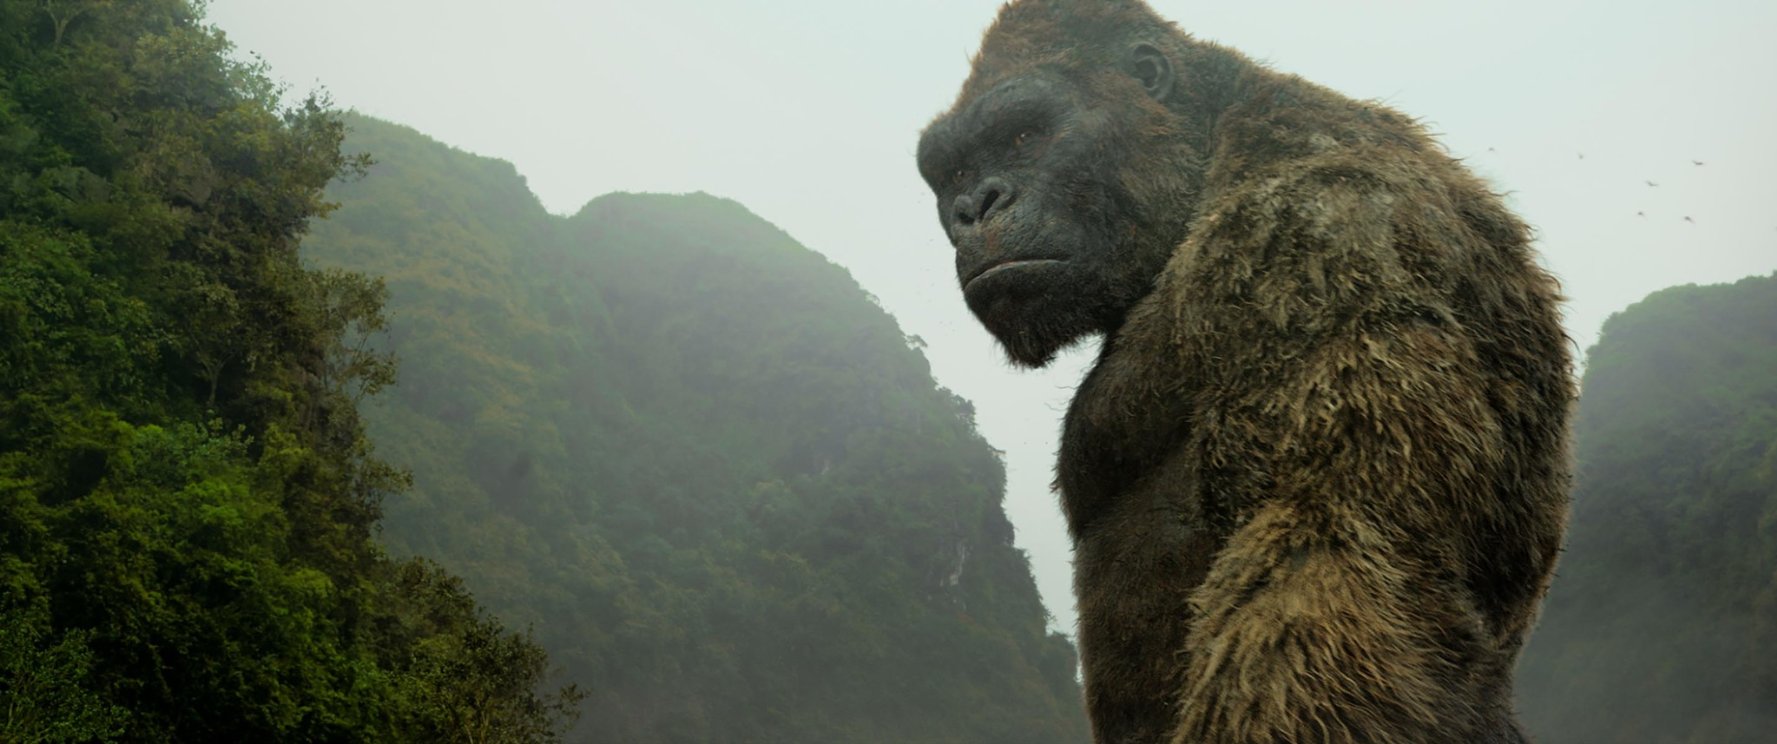 Filming Locations Of Kong Skull Island Hunting Scenic Landscapes